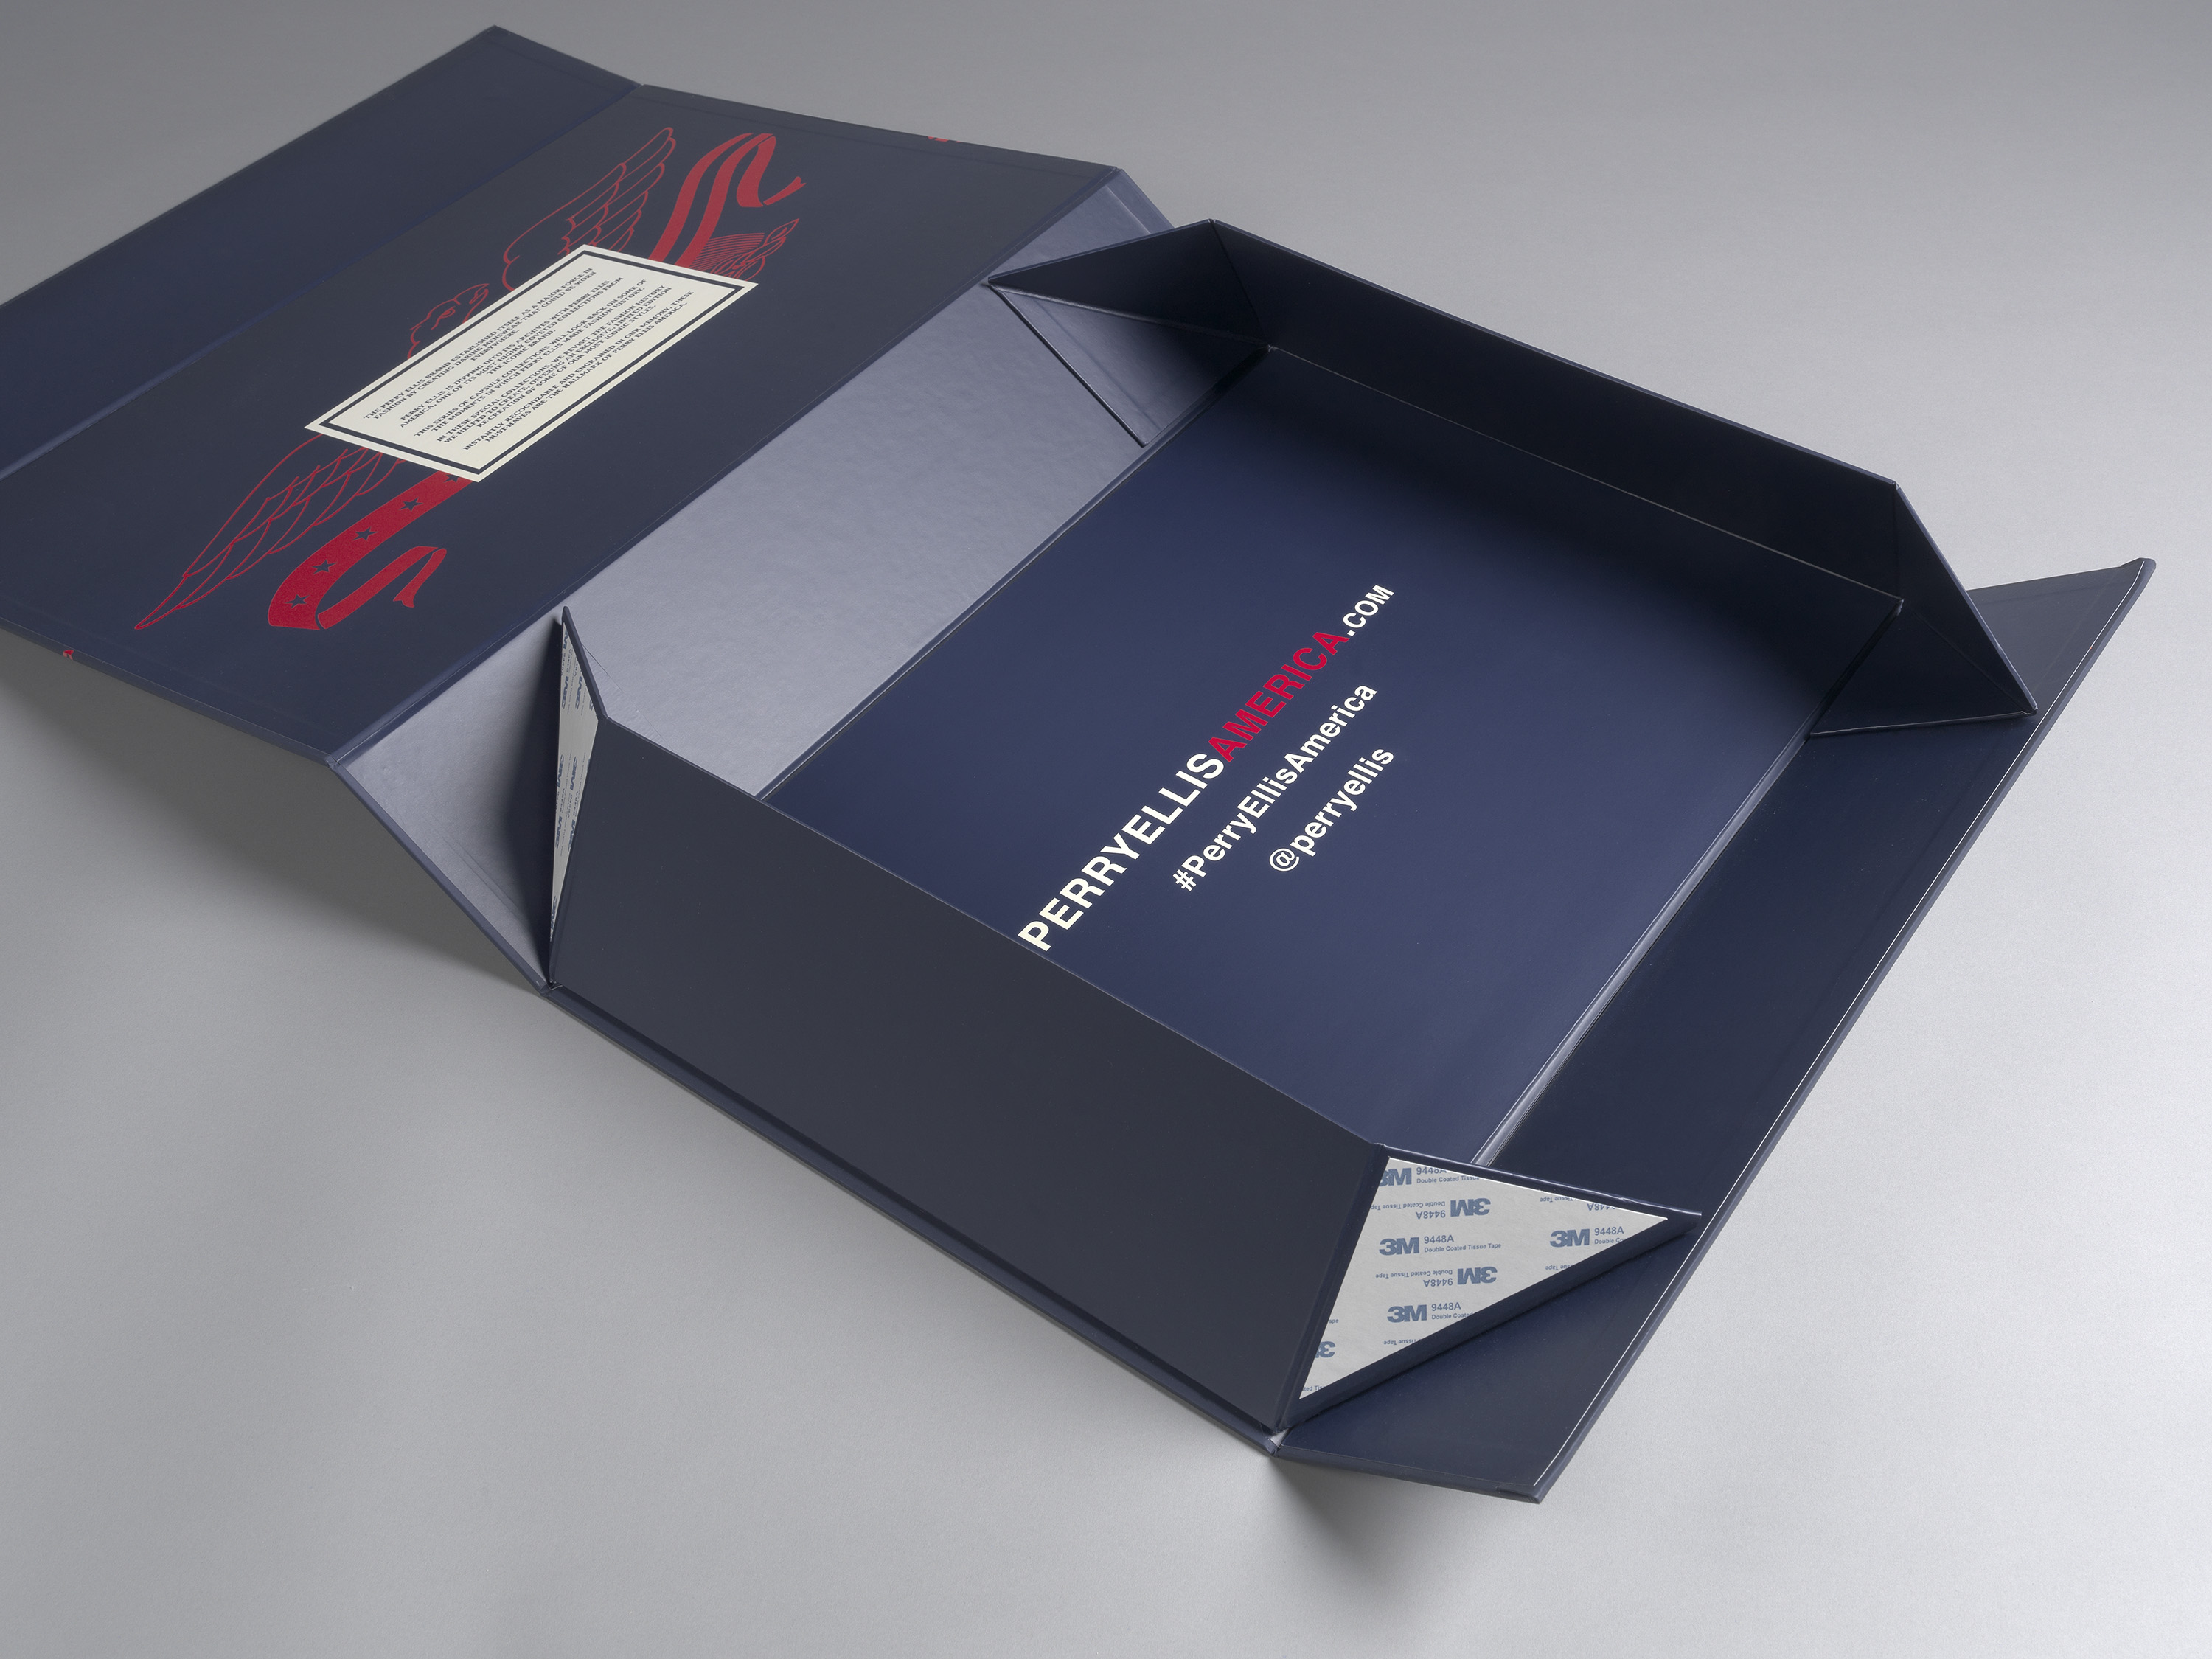 An Extravagant Gift Box for Perry Ellis